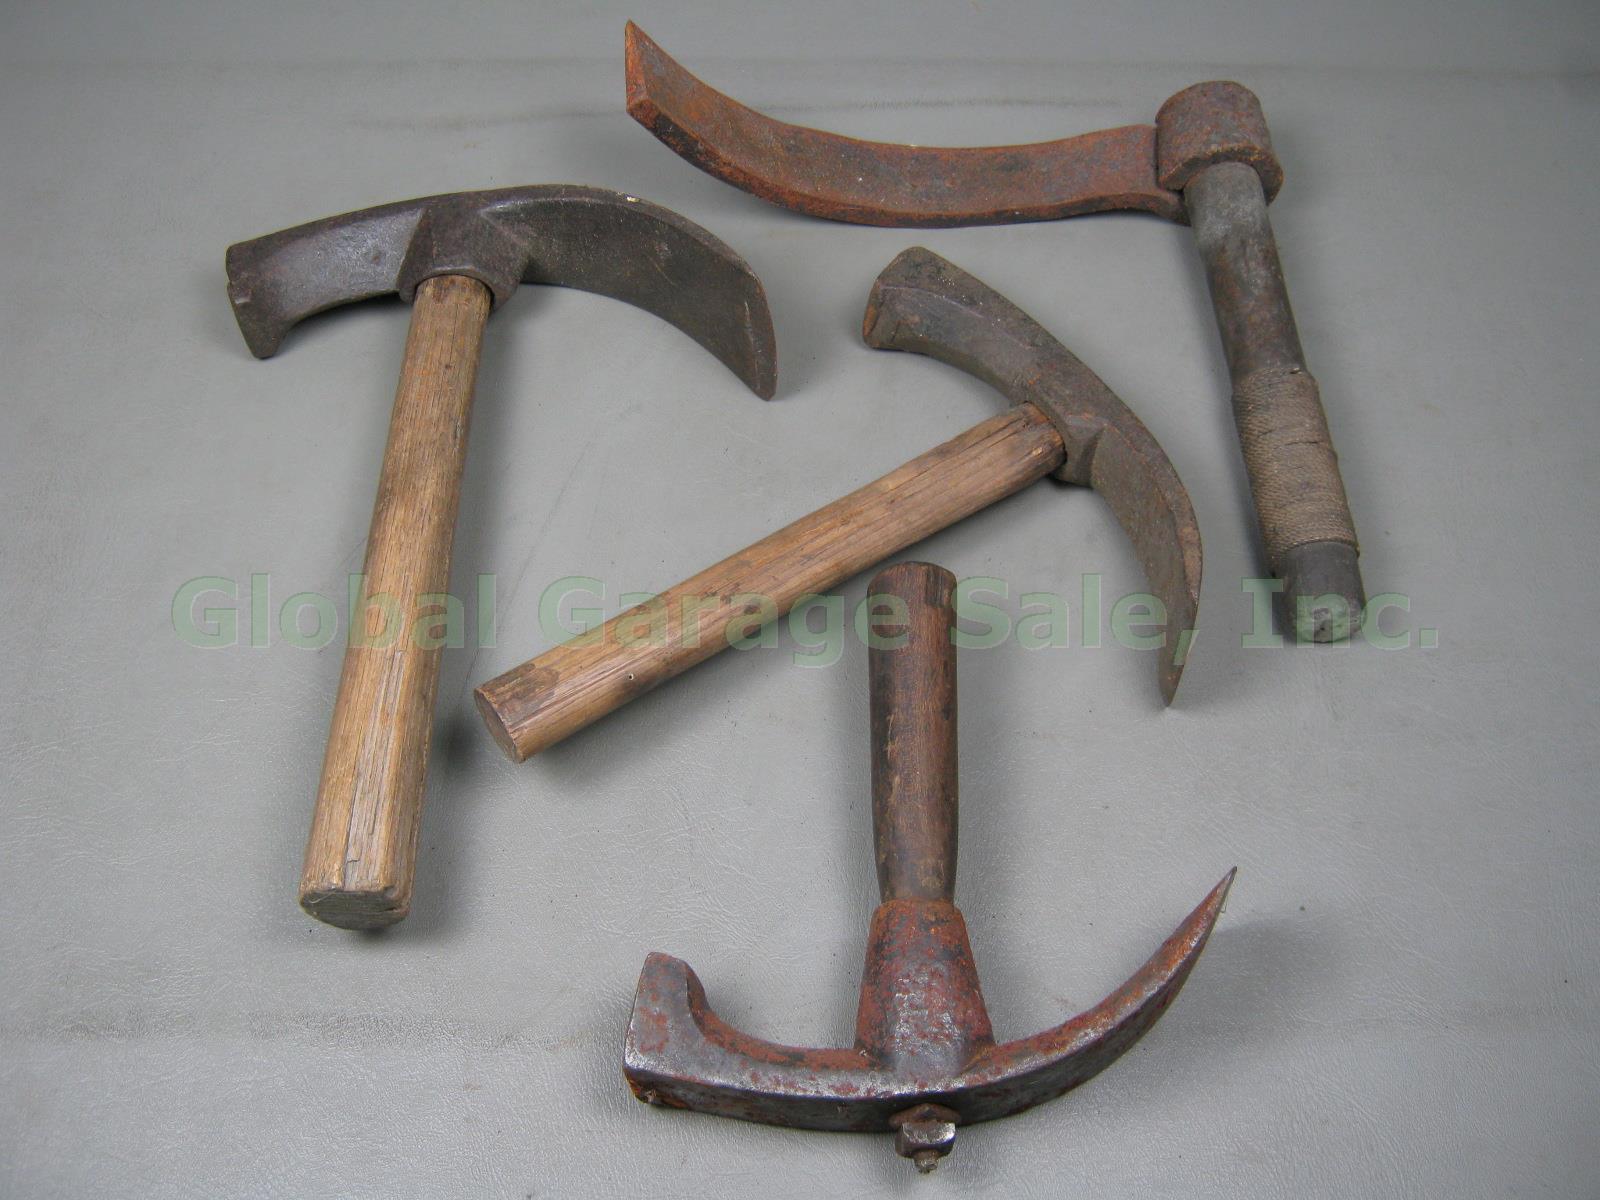 4 Vtg Antique Primitive Coopers Tools 3 Adze + Curved Froe 1